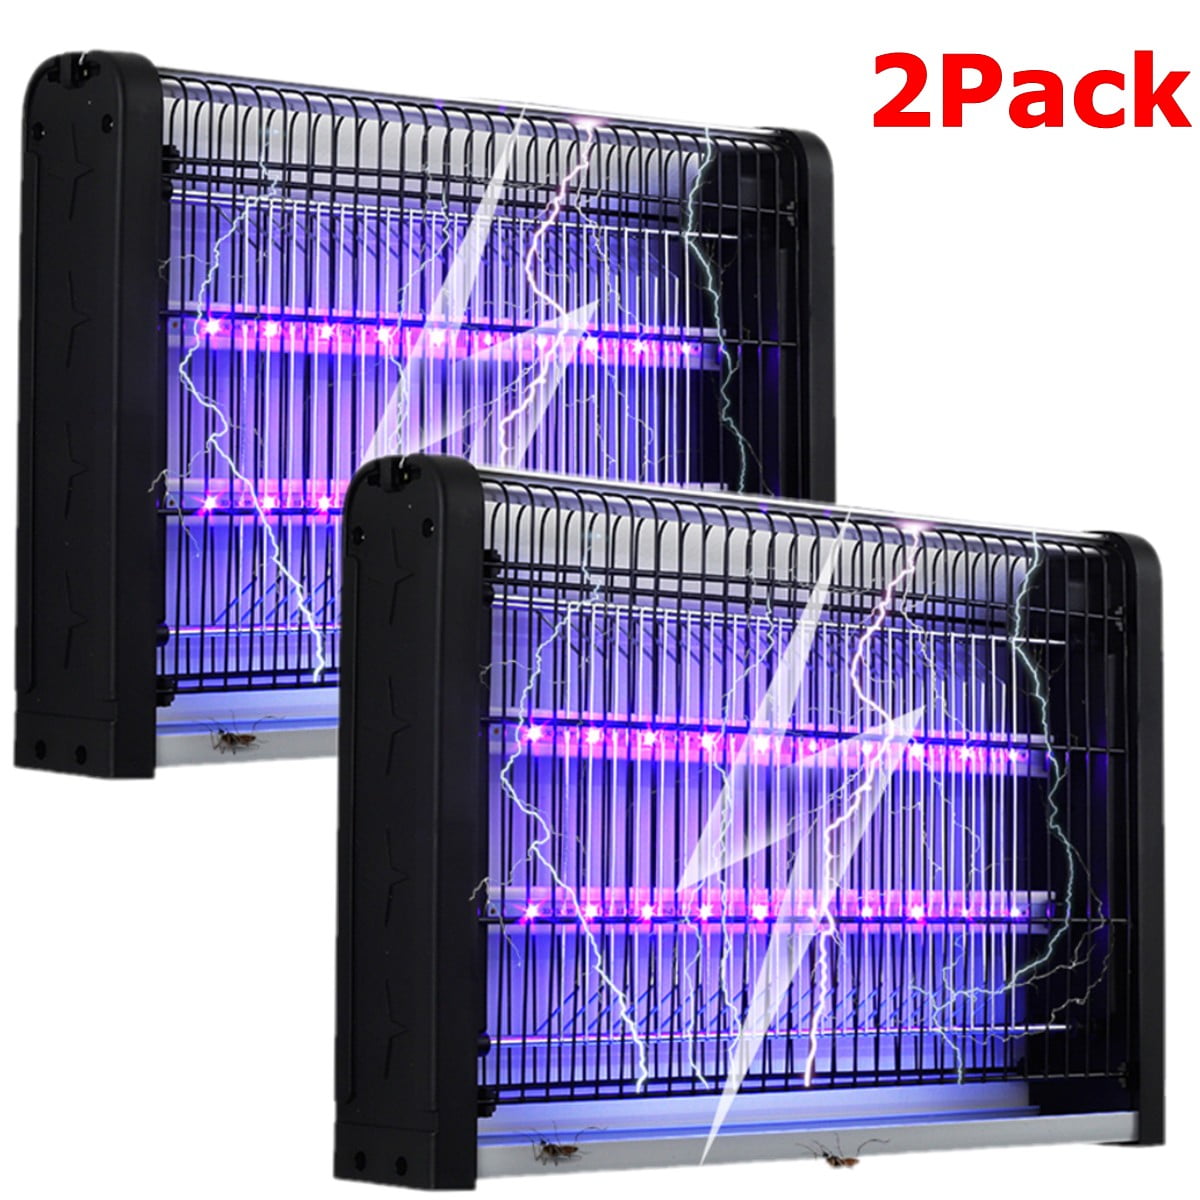 WADEO Bug Zapper Indoor with Smokeless Mosquito Killer Attracts and Kills Mos... 